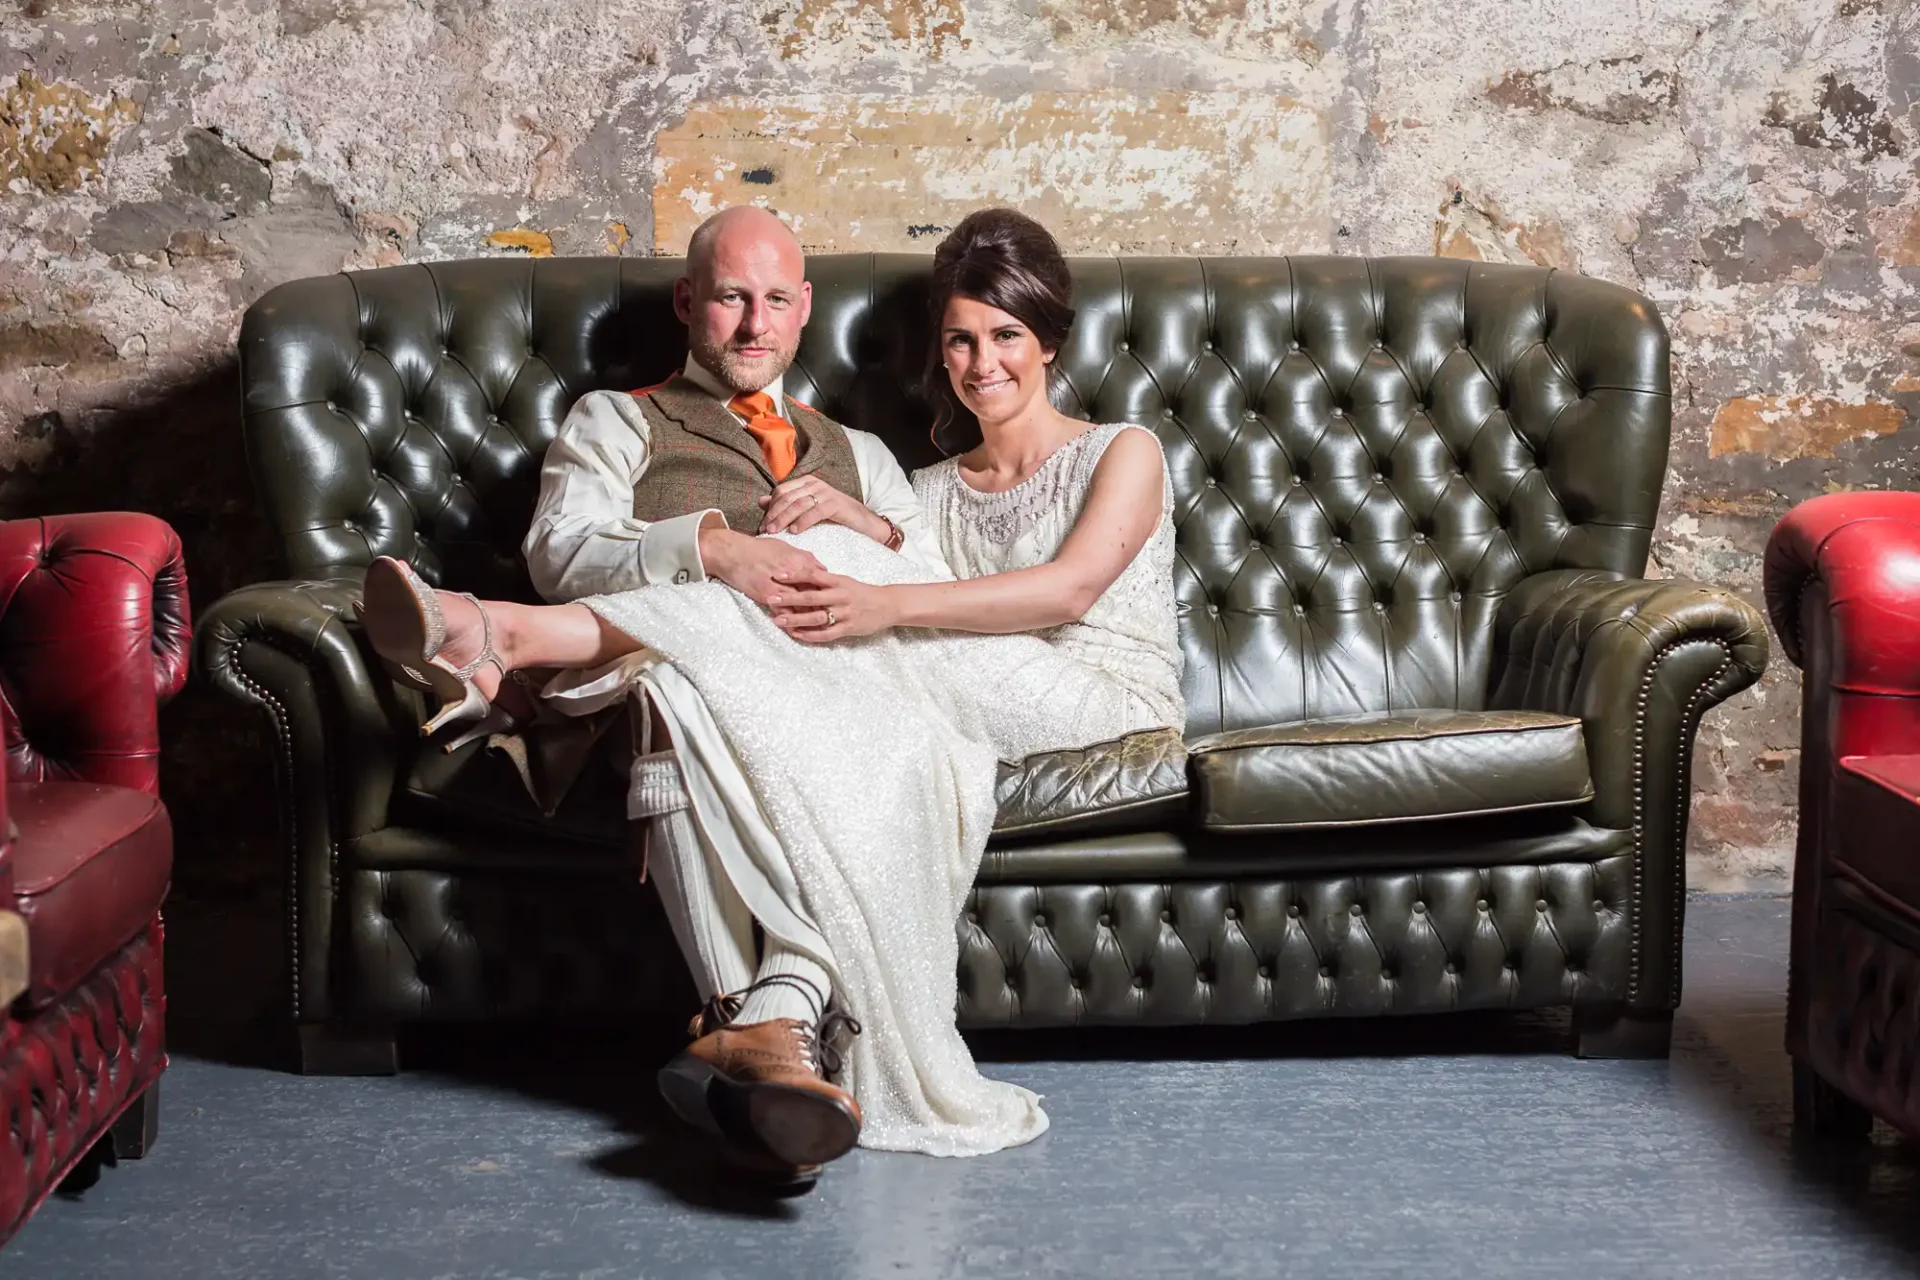 A bald man in a suit and a woman in a long dress sitting closely on a vintage leather sofa, looking at the camera, with textured walls in the background.